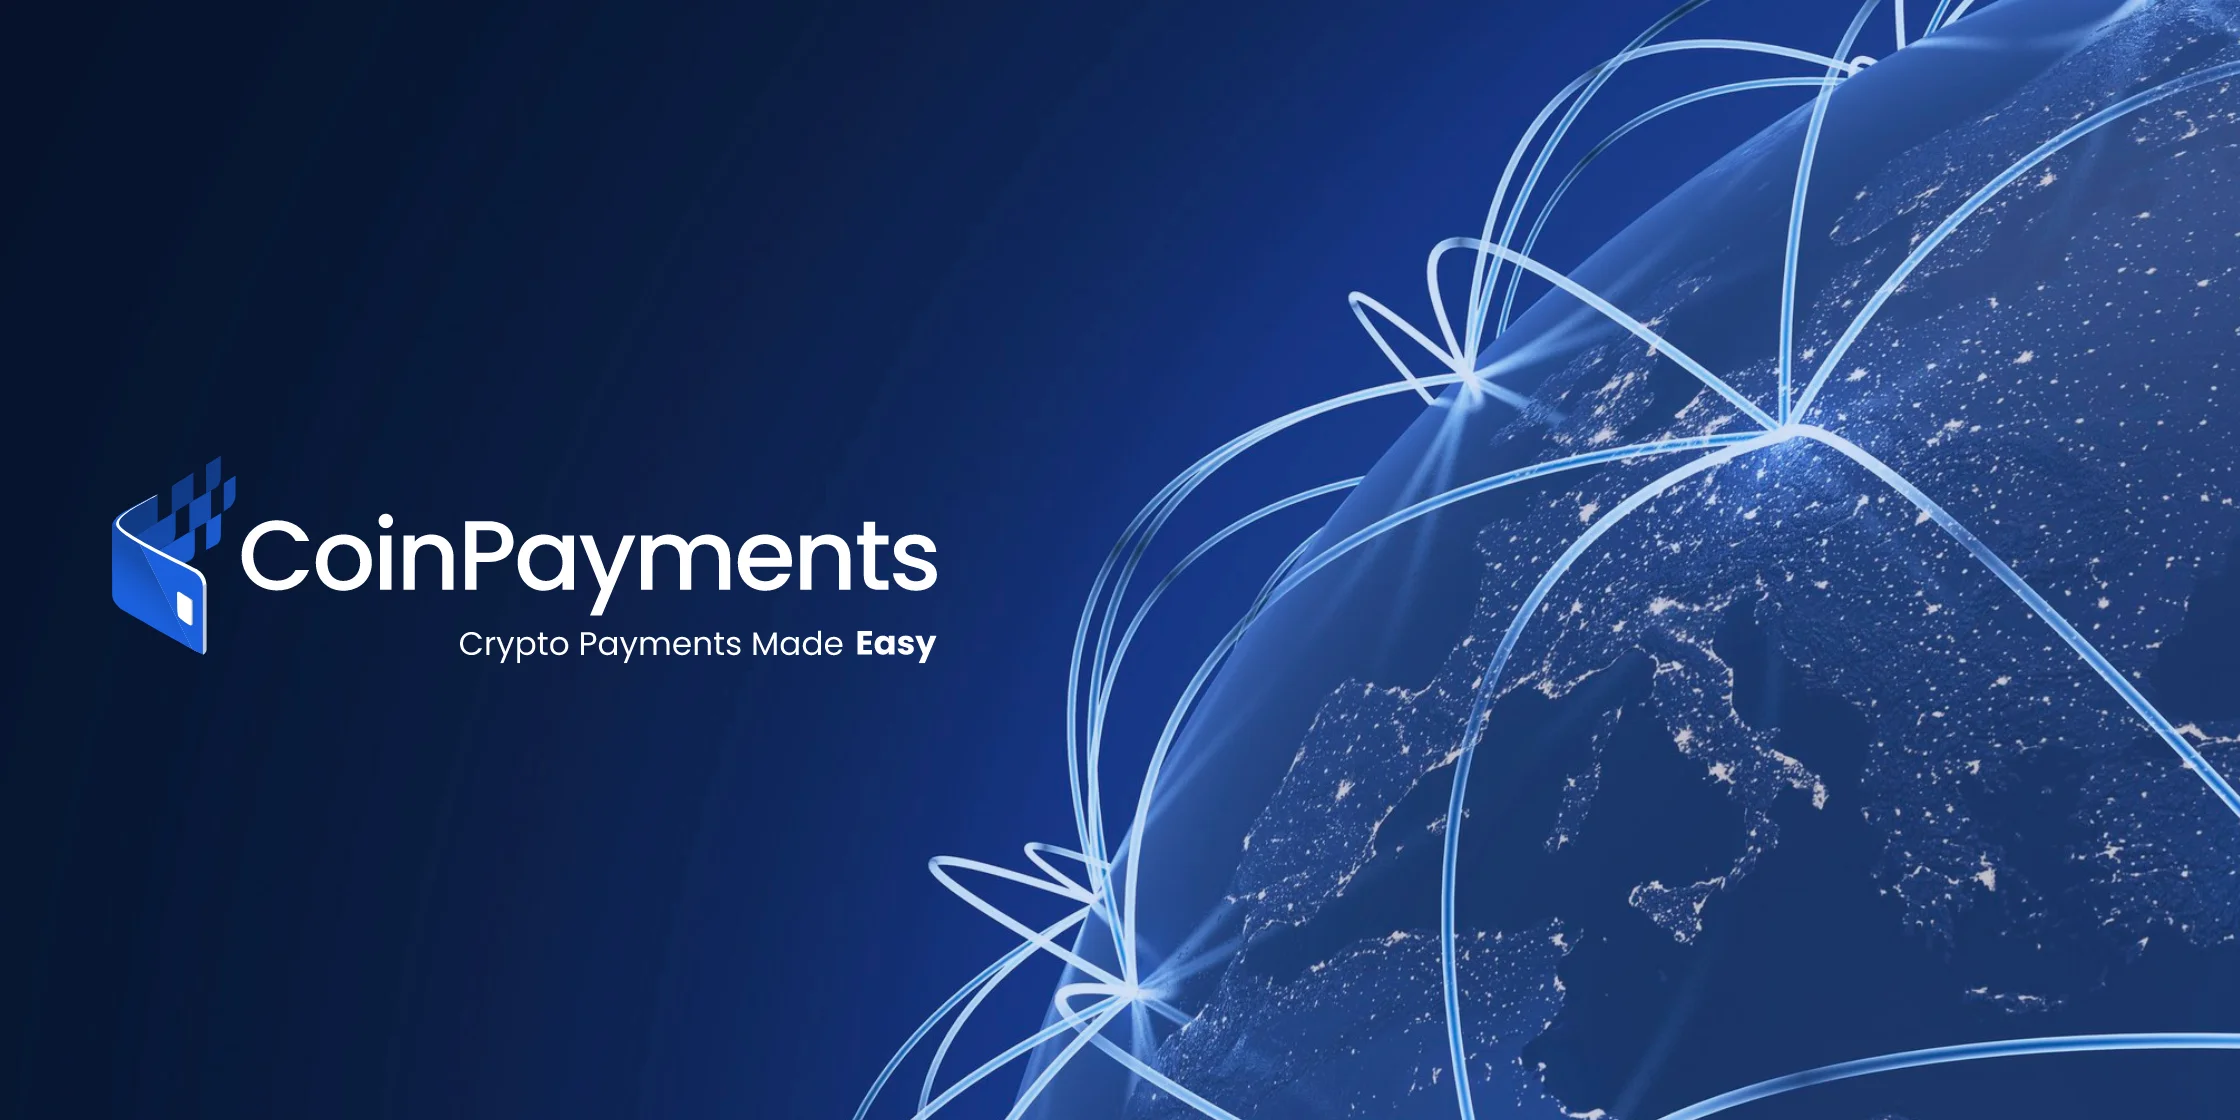 accept bitcoin payments on your website with coinpayments